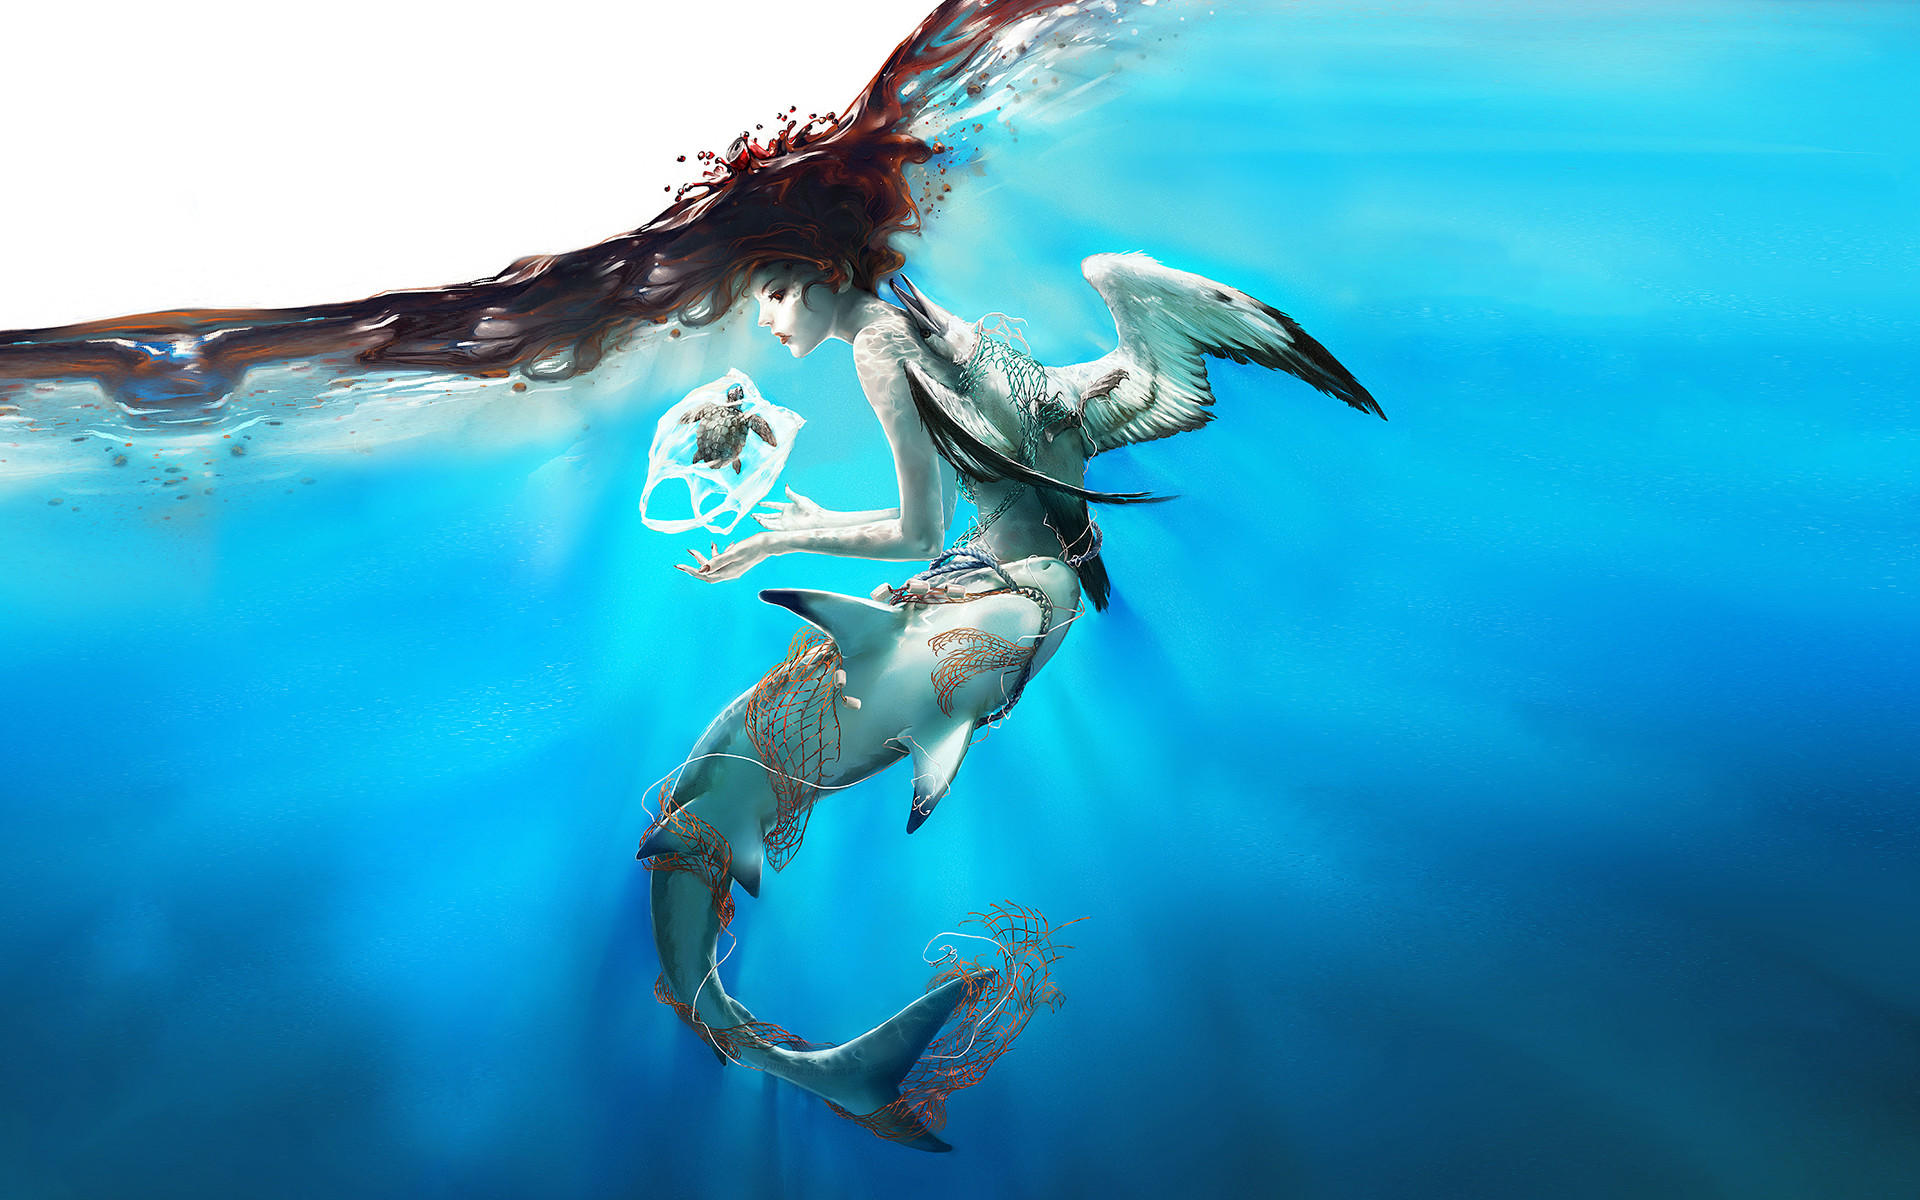 Sea Monster phone wallpaper 1080P 2k 4k Full HD Wallpapers Backgrounds  Free Download  Wallpaper Crafter